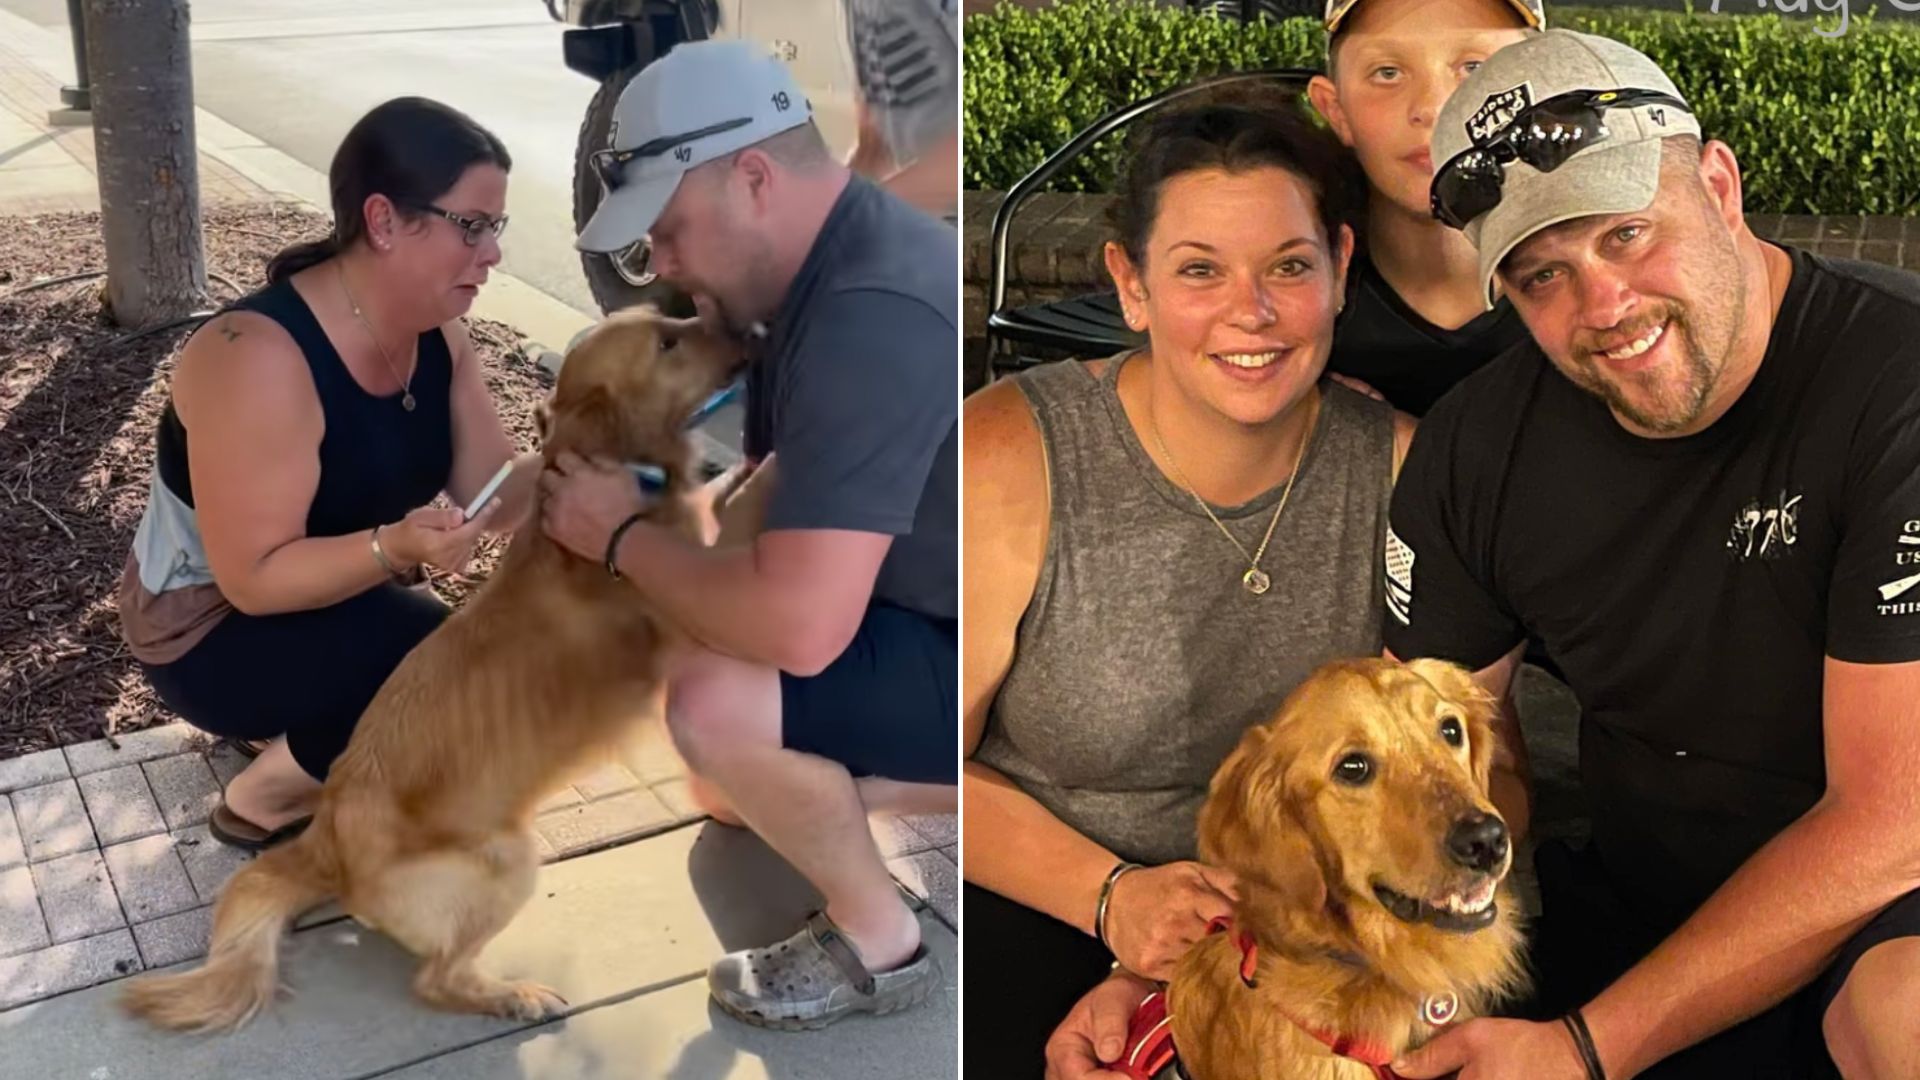 An Entire Community Came Together In Order To Find A Missing Dog Lost While On Vacation